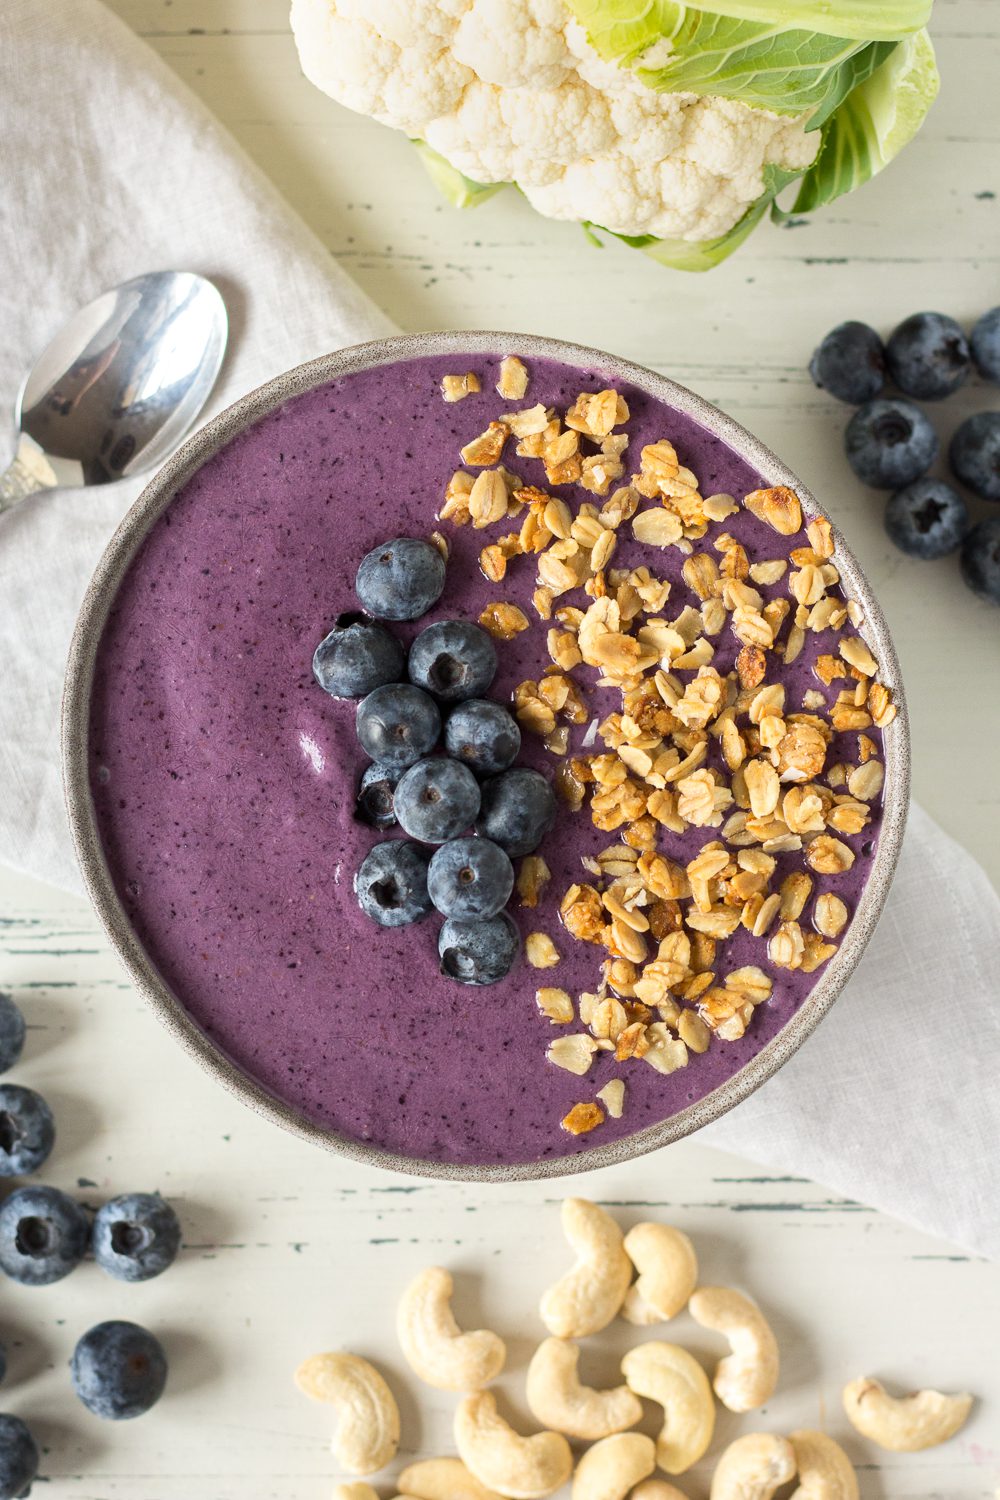 https://b1319836.smushcdn.com/1319836/wp-content/uploads/2019/03/blueberry-smoothie-without-banana.jpg?lossy=1&strip=1&webp=1